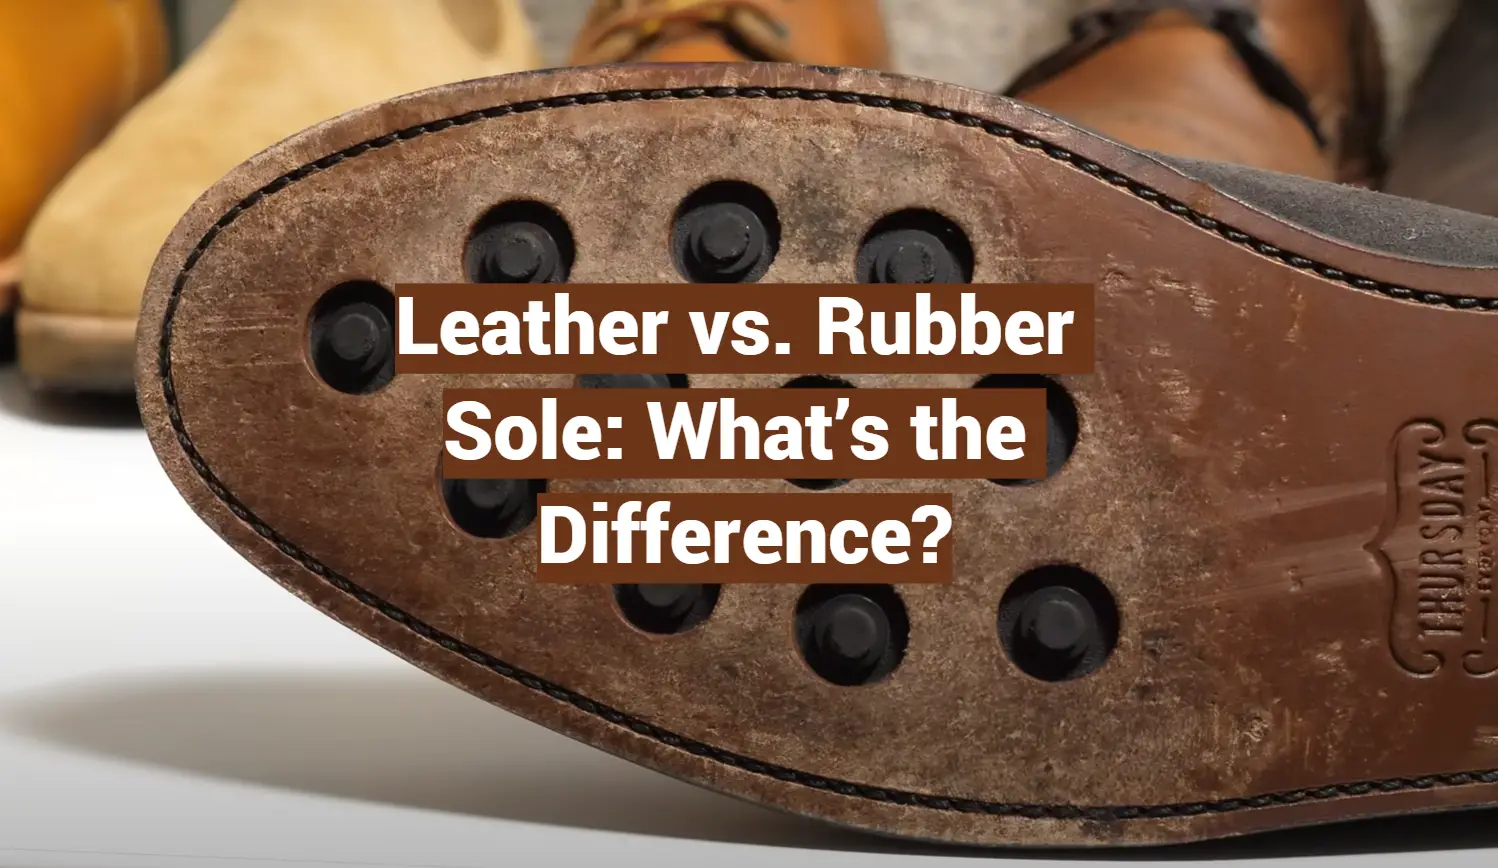 Leather vs. Rubber Sole: What’s the Difference?